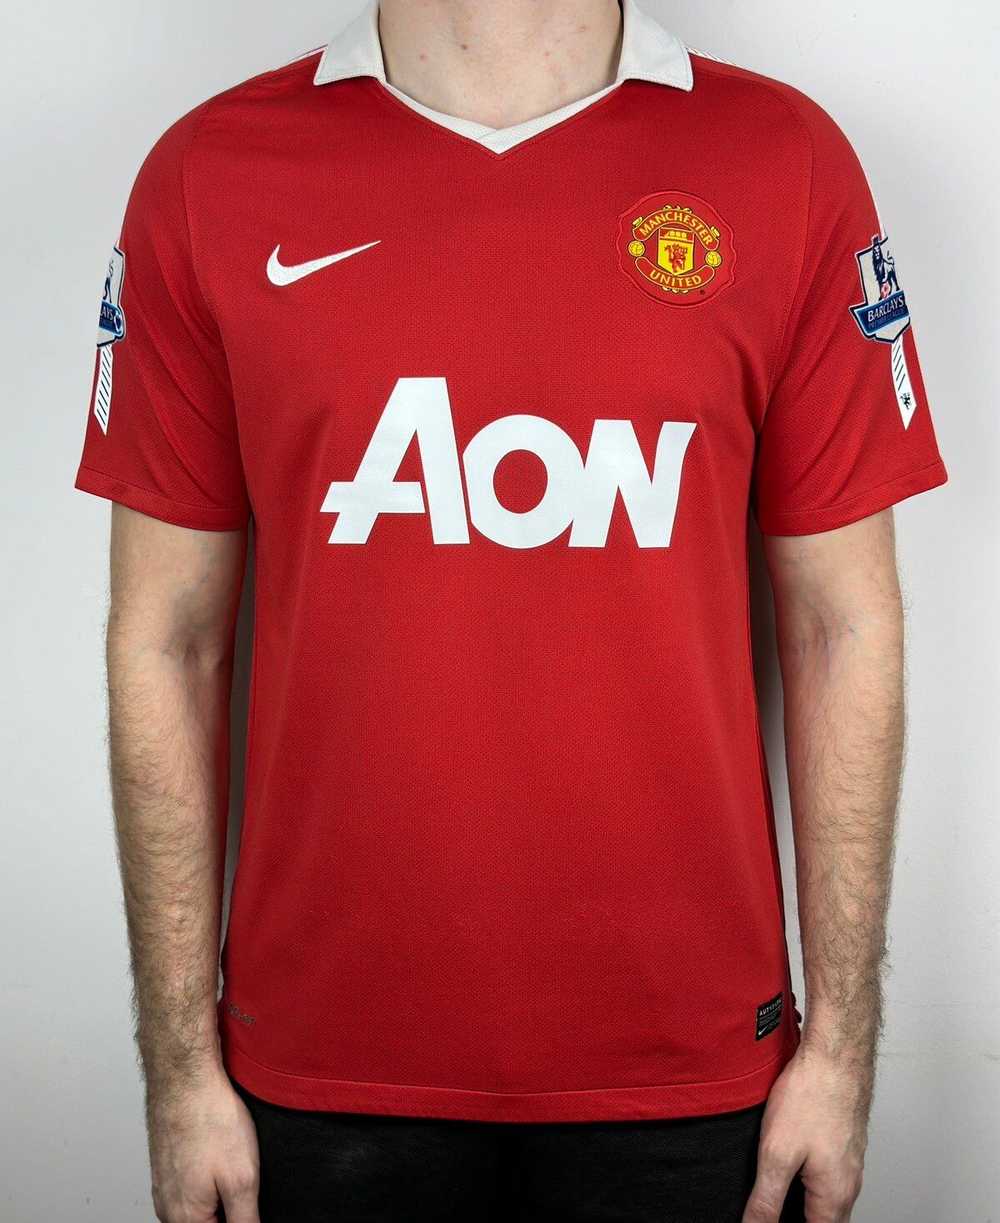 Jersey × Nike × Soccer Jersey #10 Rooney Manchest… - image 2